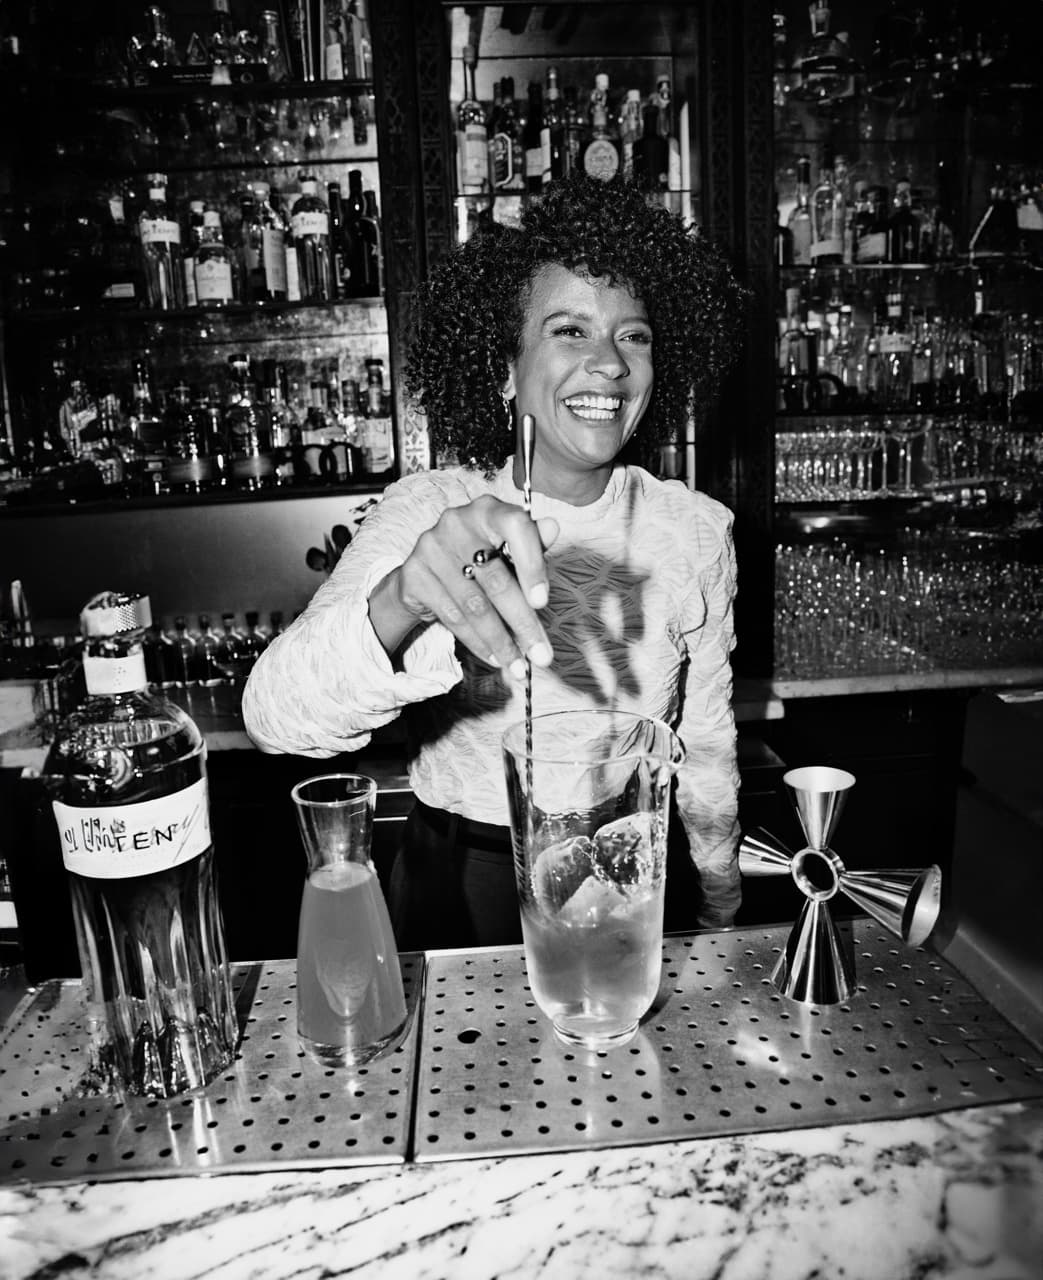 Juila Ba smiling and mixing a cocktail.